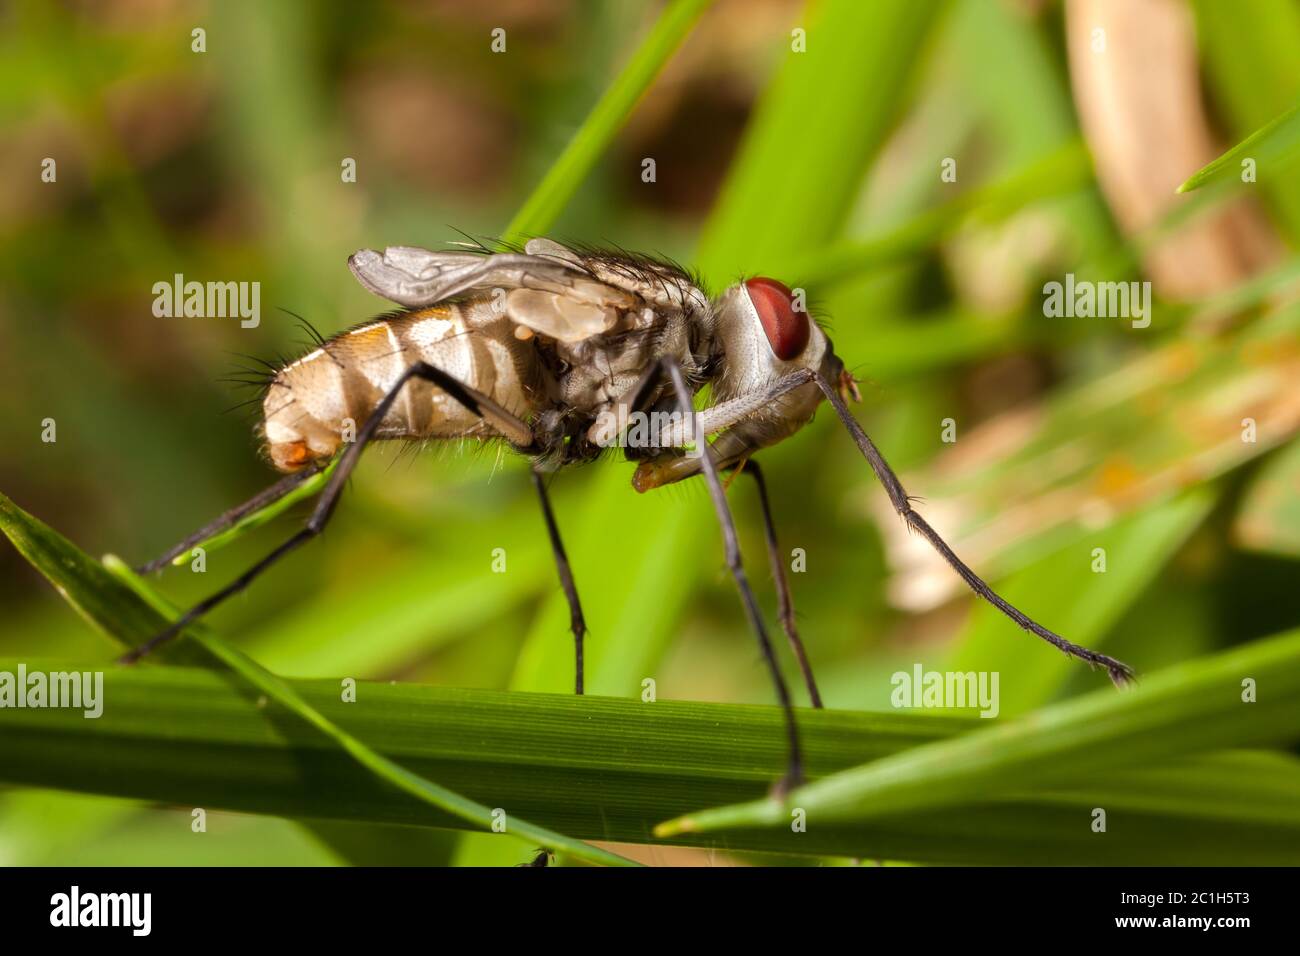 Young newborn house fly with closed wings - housefly baby Stock Photo